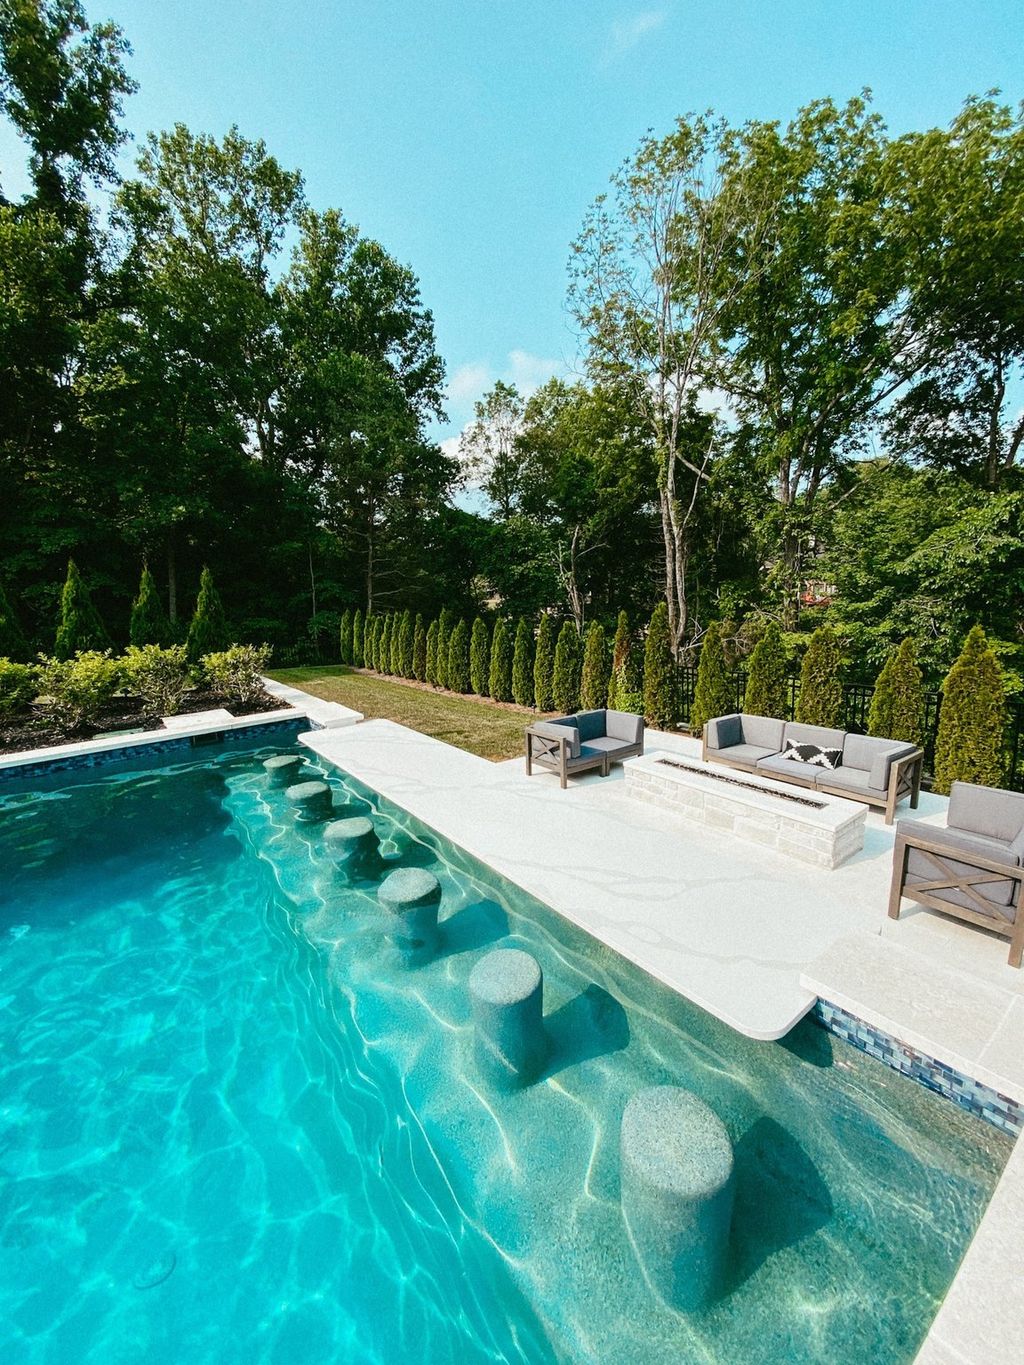 Elegant and Tranquil Private Gated Estate on Liberty Church Rd in Brentwood, TN Hits the Market at $8.36M